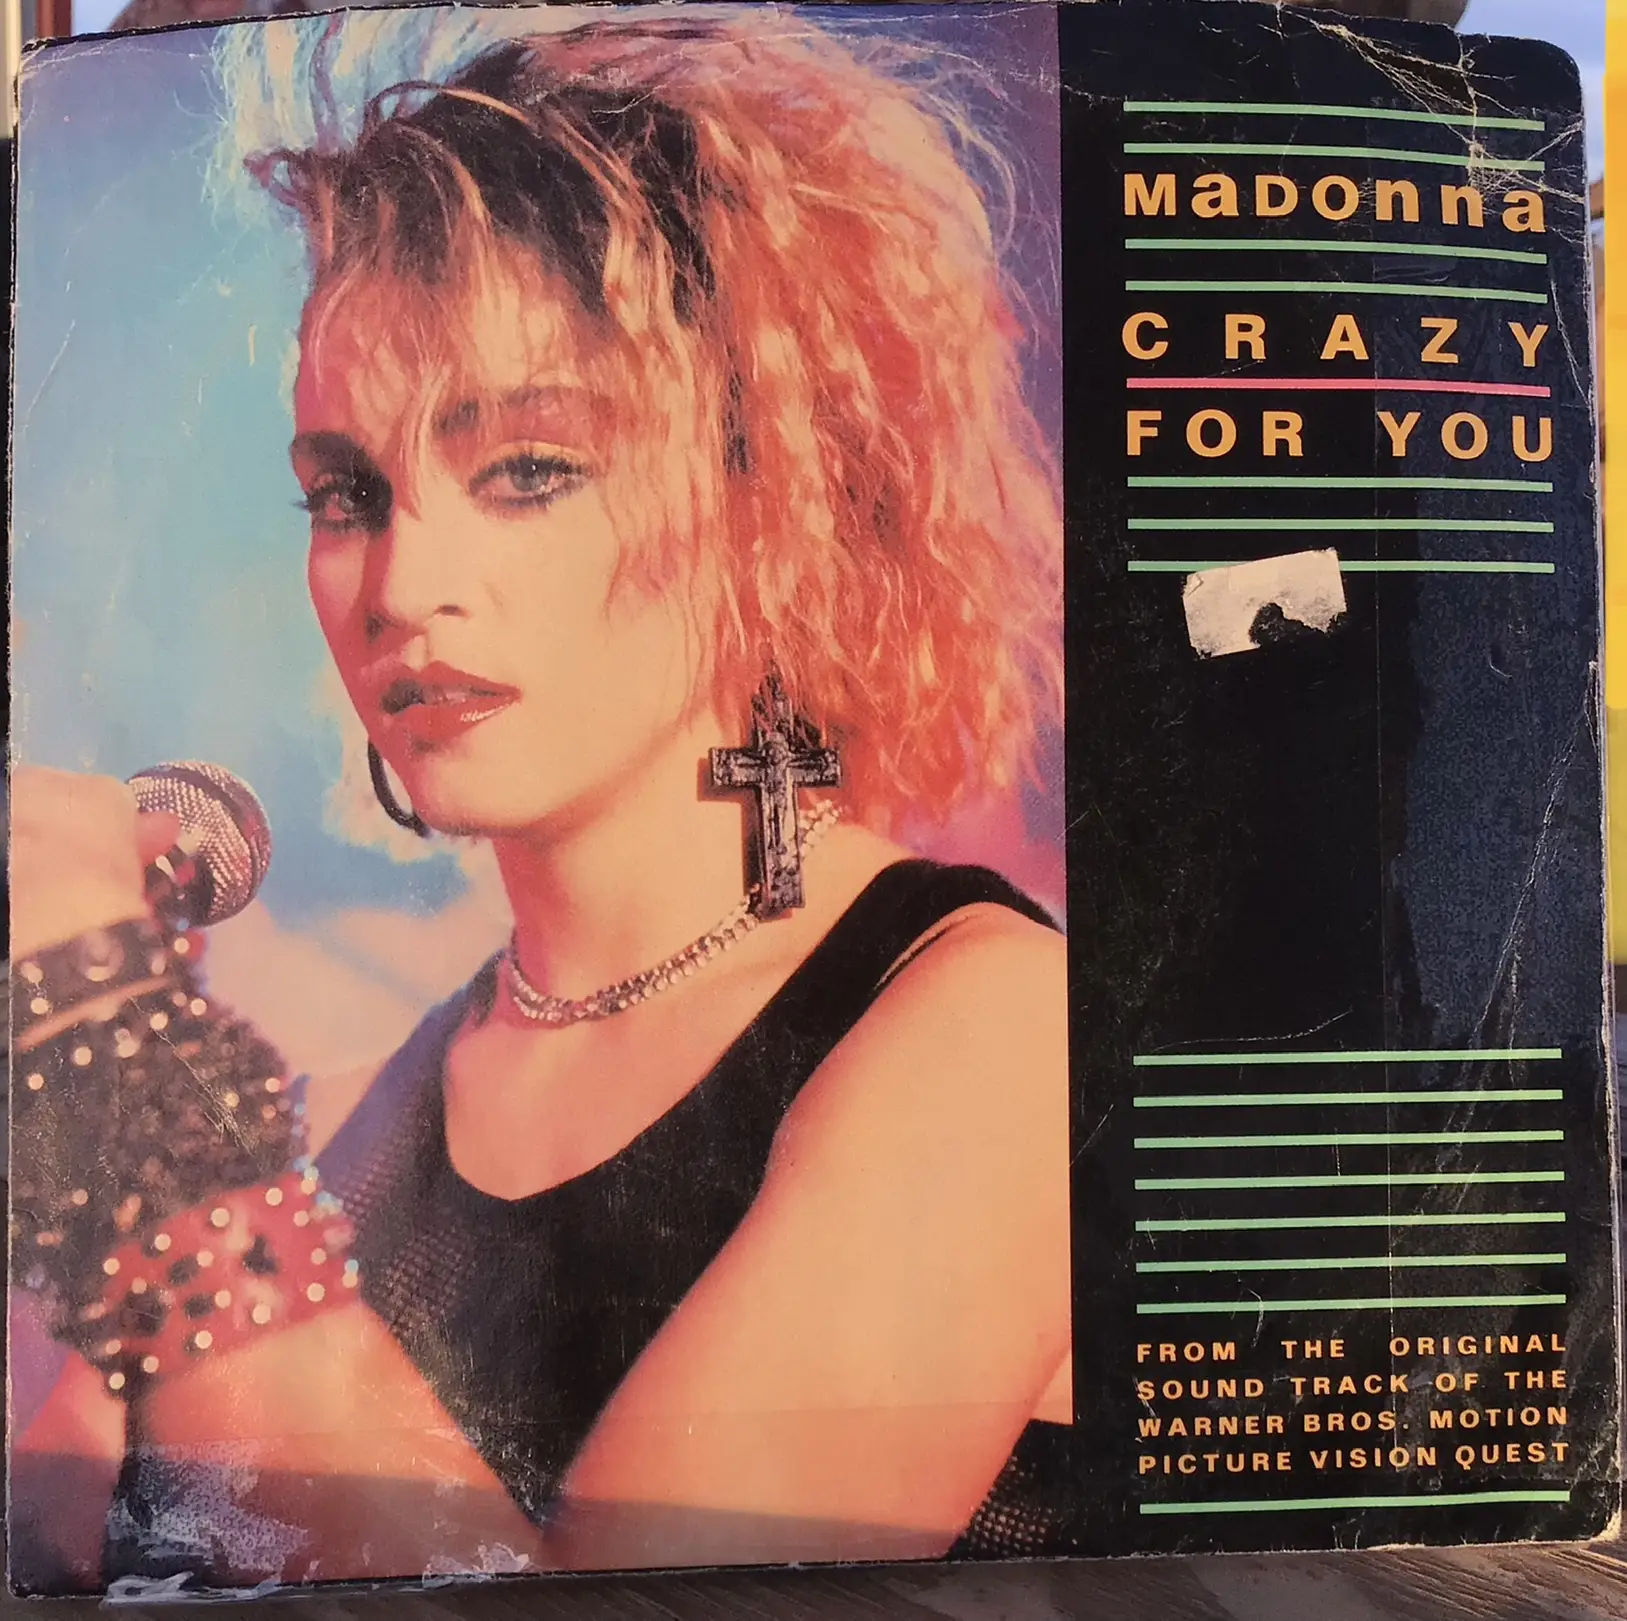 Crazy about Madonna from the 8 | Gallery posted by Vinyl Records | Lemon8